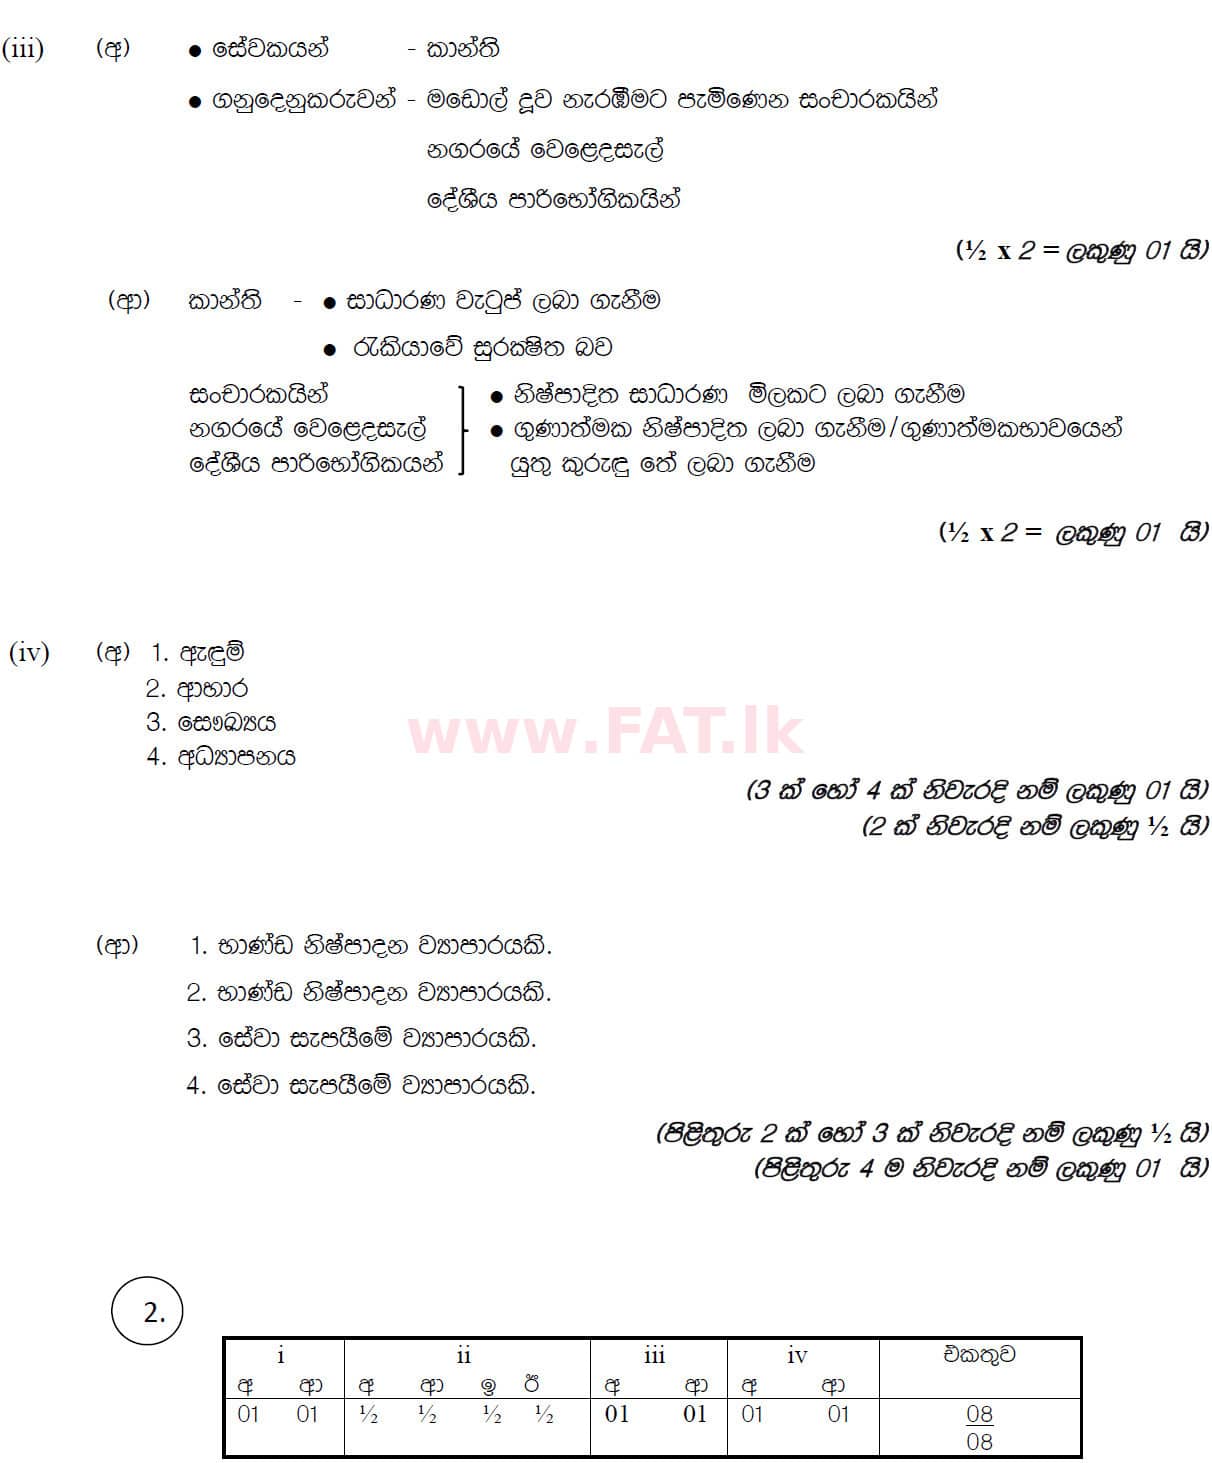 National Syllabus : Ordinary Level (O/L) Business and Accounting Studies - 2019 March - Paper II (සිංහල Medium) 2 5890